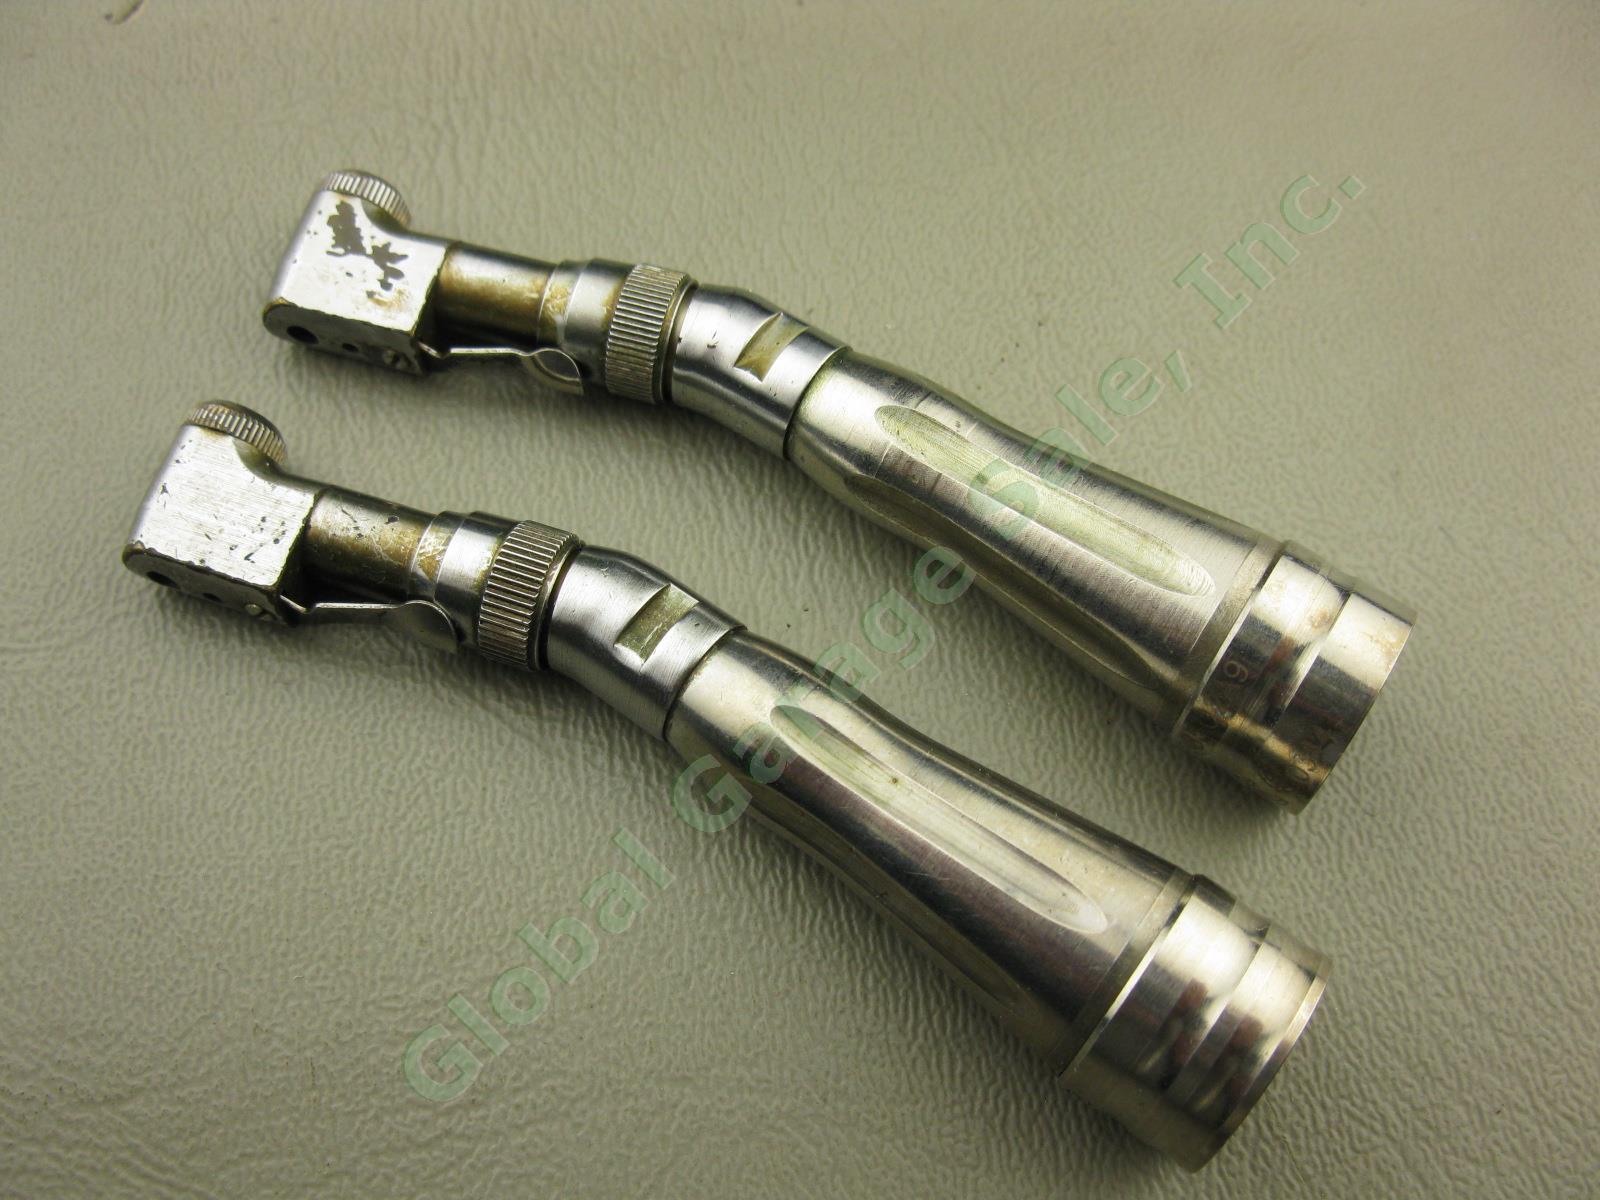 2 Contra Angle Attachments W/ Swing Latch Heads For Star Titan Dental Handpieces 1